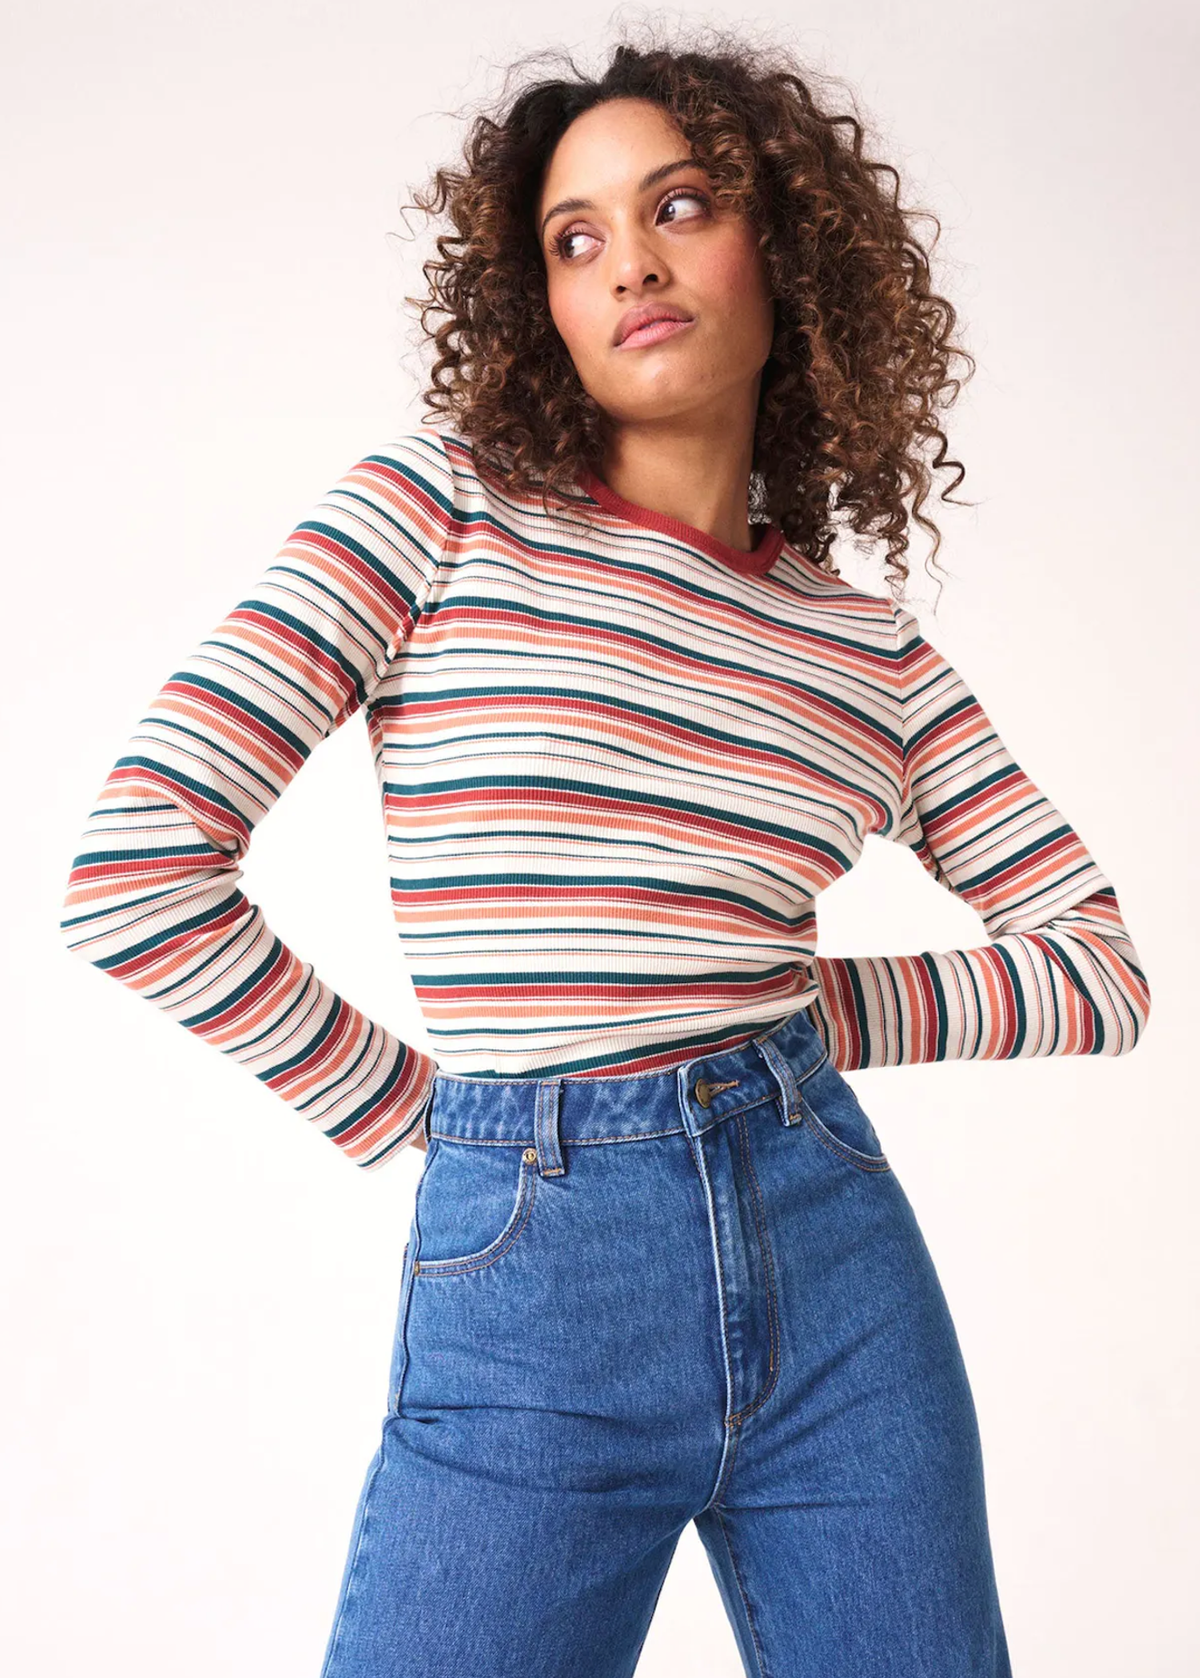 70s inspired long sleeve rib ringer tee with white, brick red, and teal stripe by Rolla's Jeans, Dazed and Confused vibes